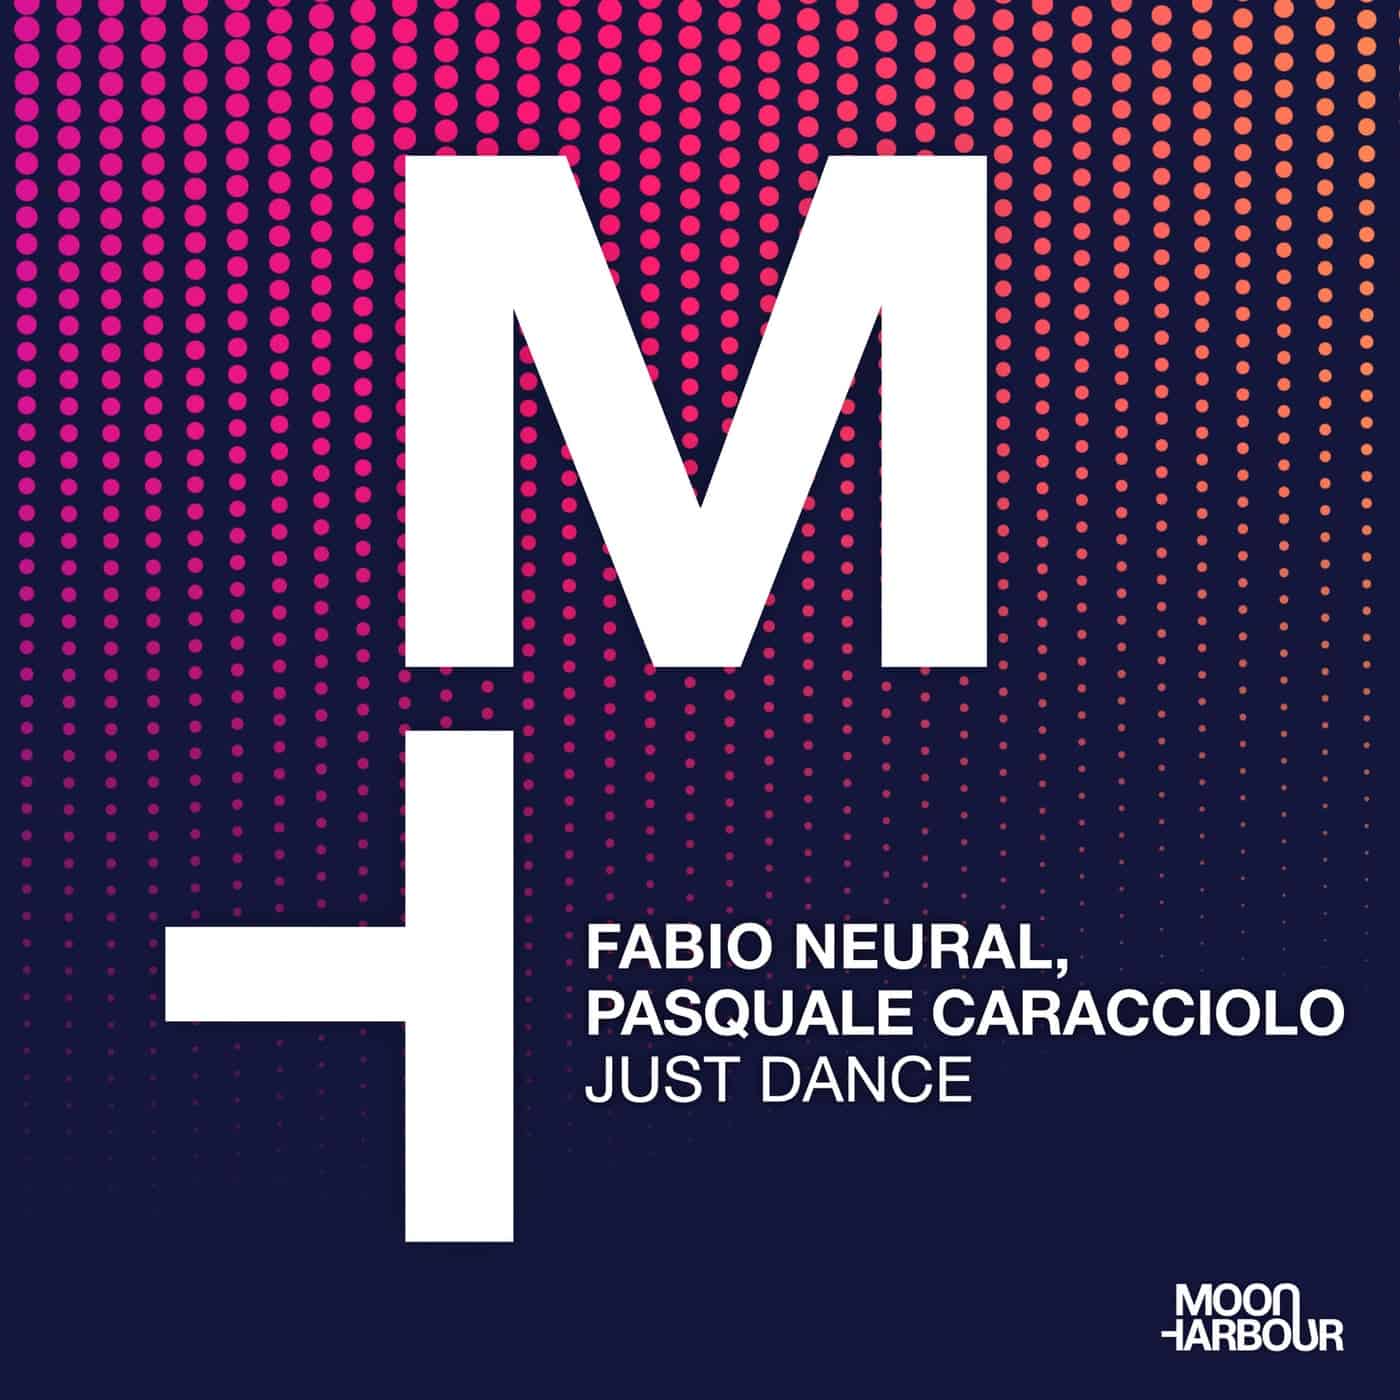 Download Fabio Neural, Pasquale Caracciolo - Just Dance on Electrobuzz